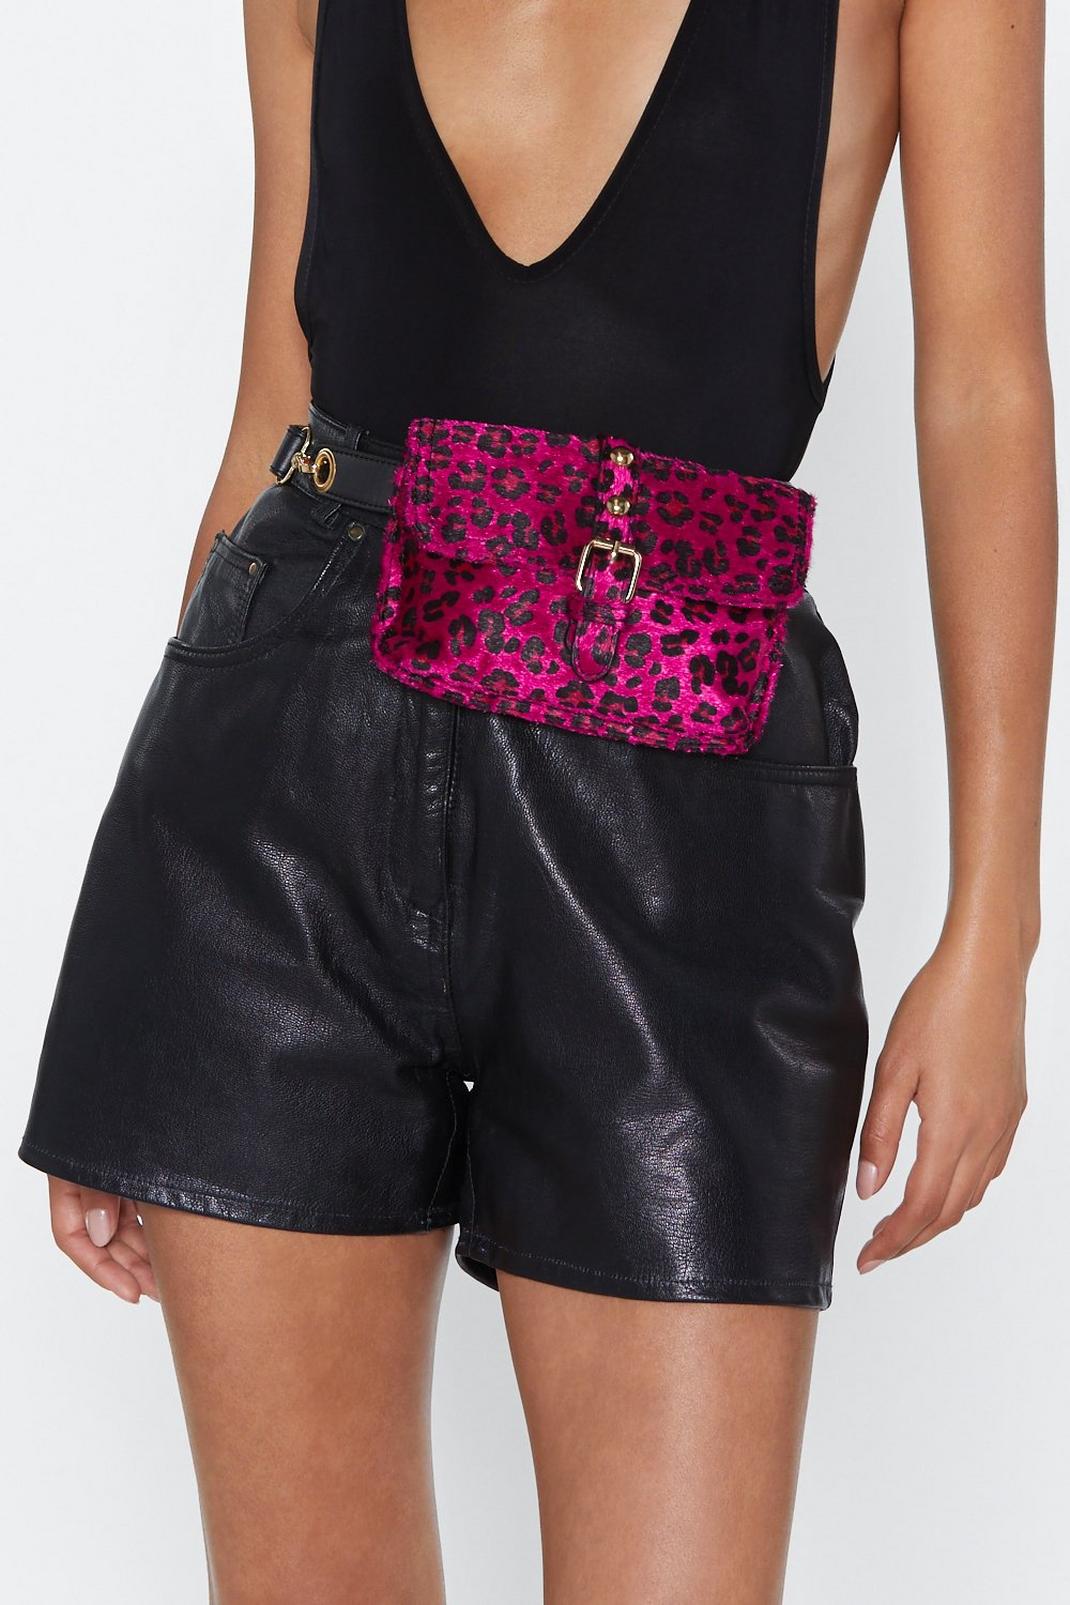 WANT Woman of the Meow-ment Leopard Belt Bag image number 1